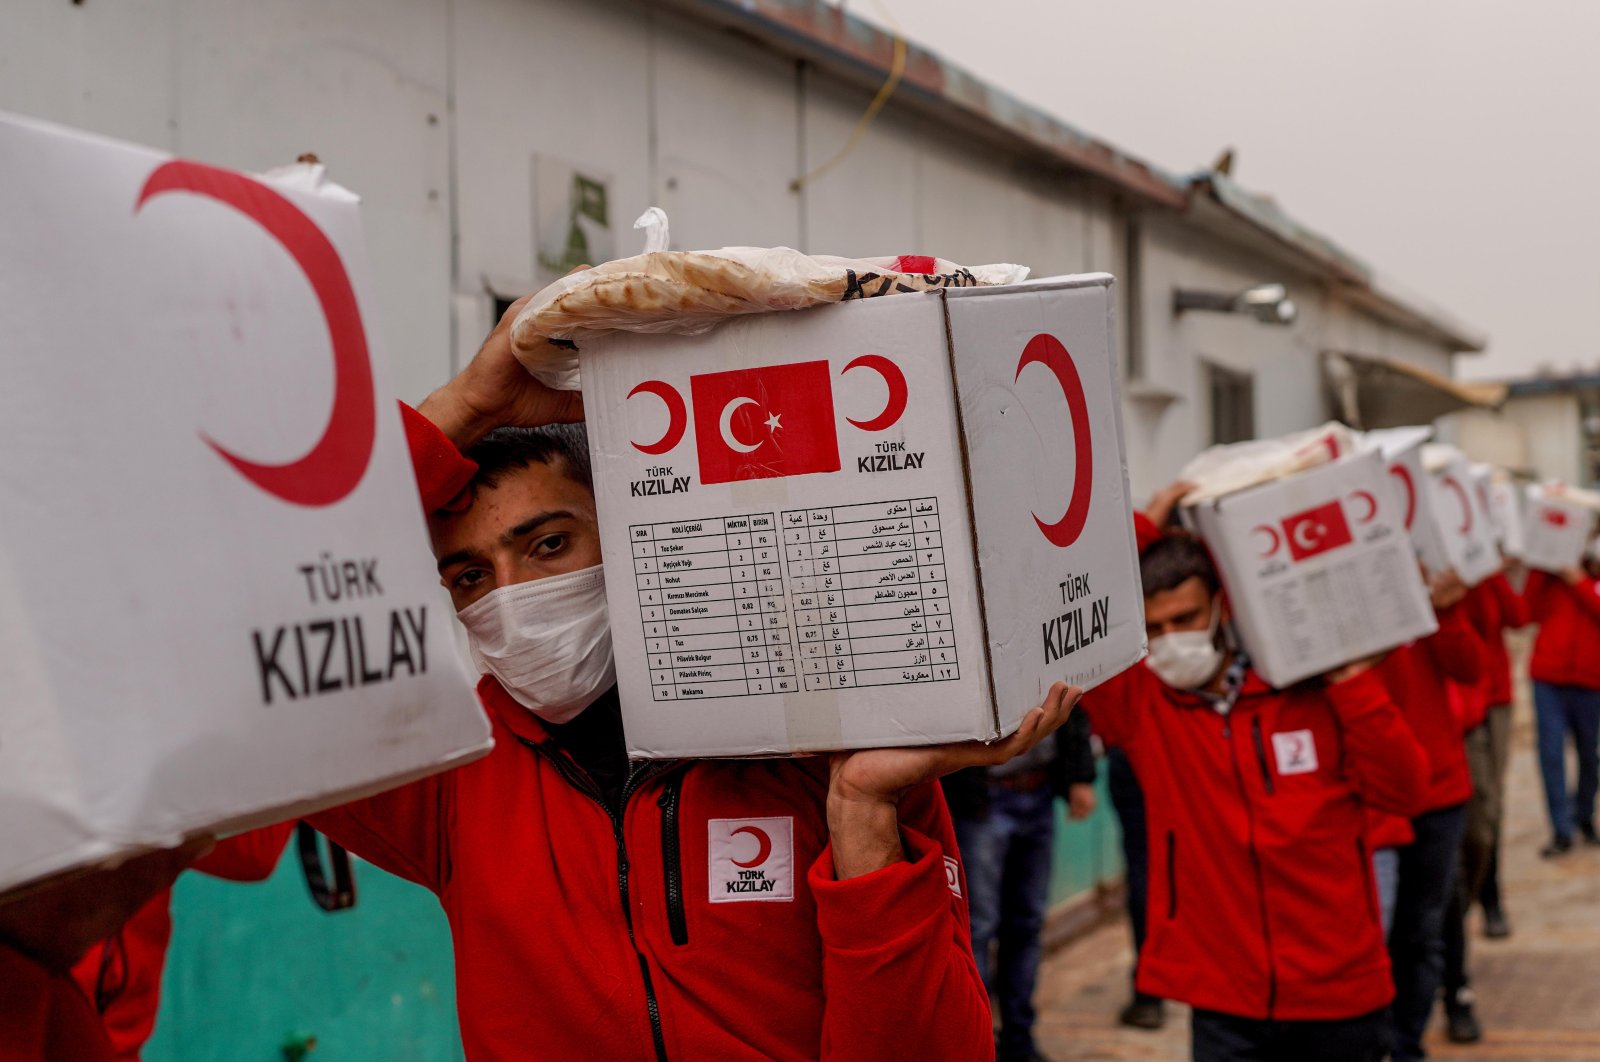 Turkish Red Crescent staff deliver humanitarian aid to internally displaced people in Idlib, Syria, Nov. 29, 2021. (PHOTO BY UĞUR YILDIRIM)